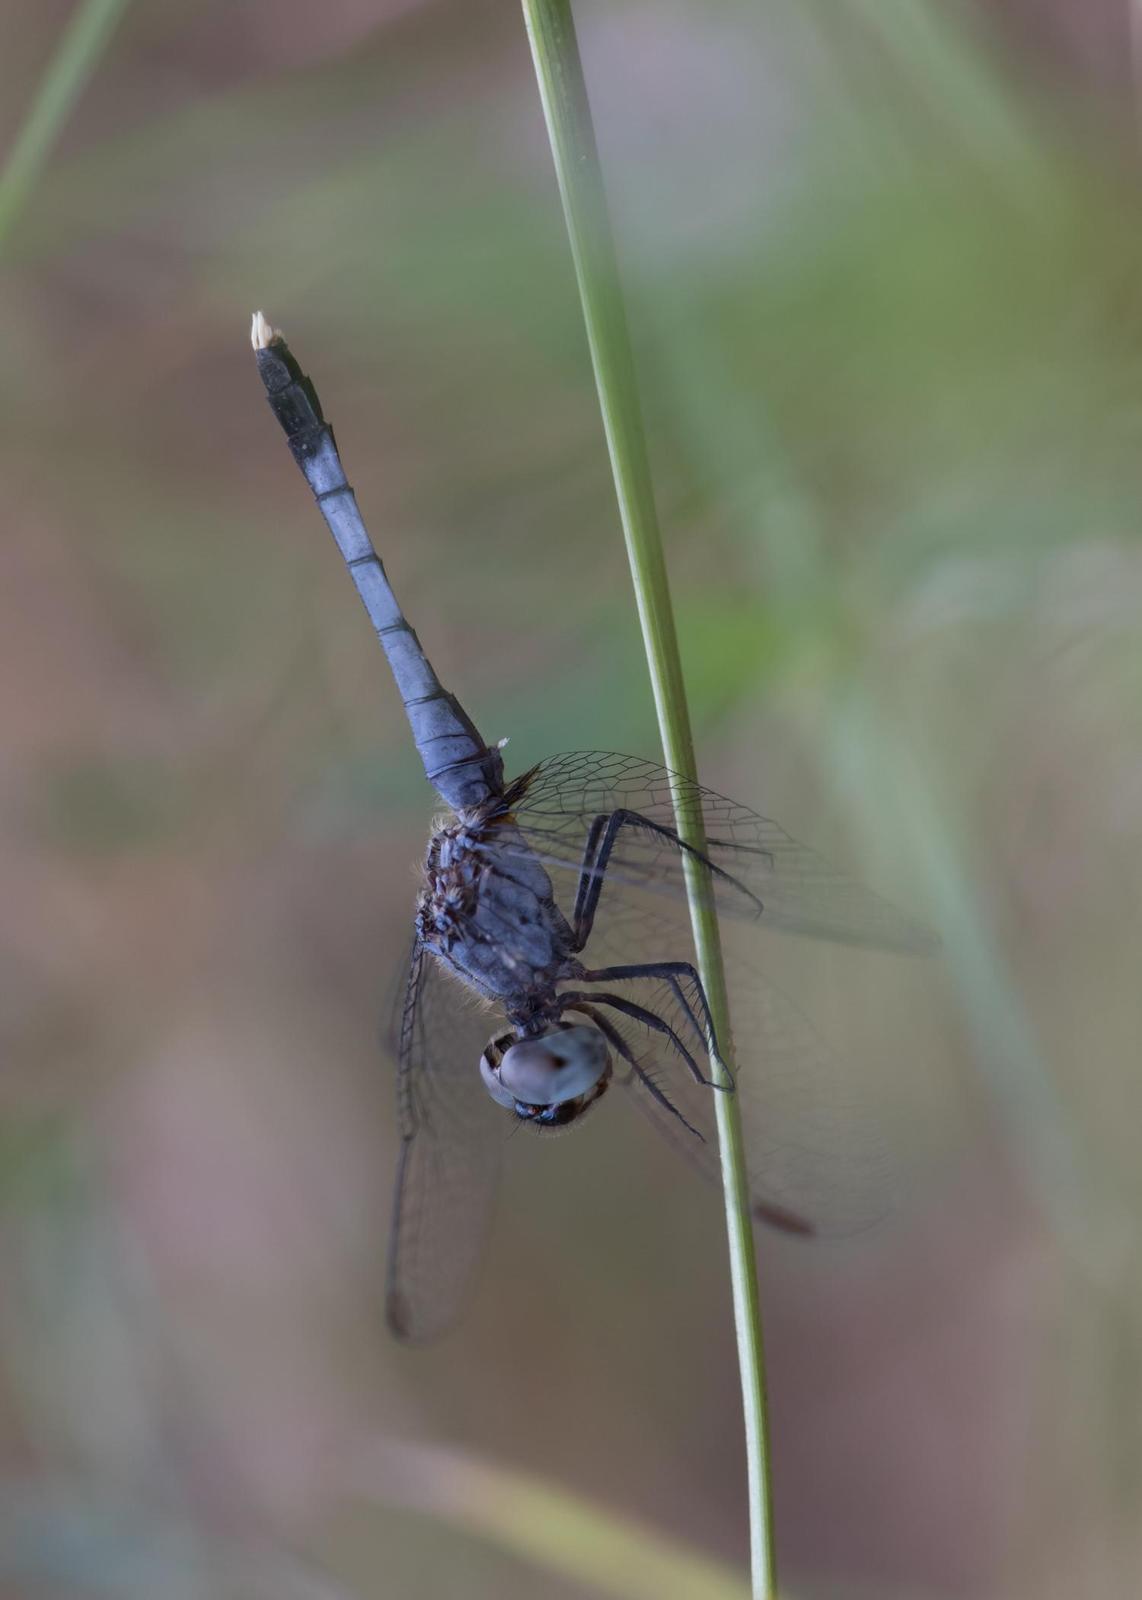 Little Blue Dragonlet Photo by Chuck Duplant